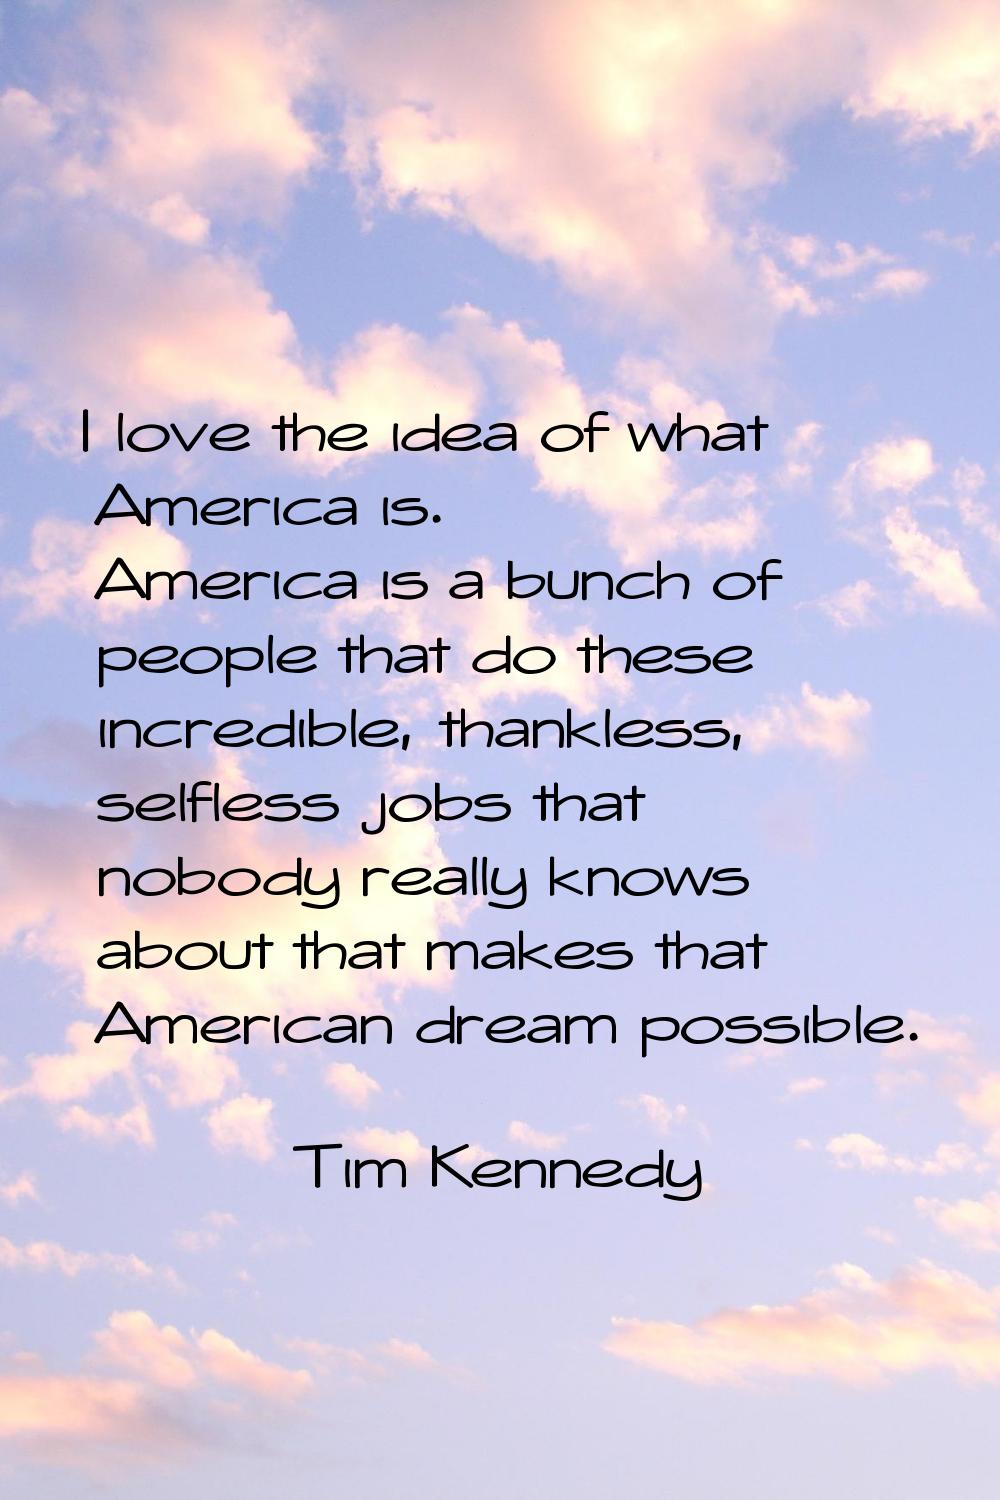 I love the idea of what America is. America is a bunch of people that do these incredible, thankles